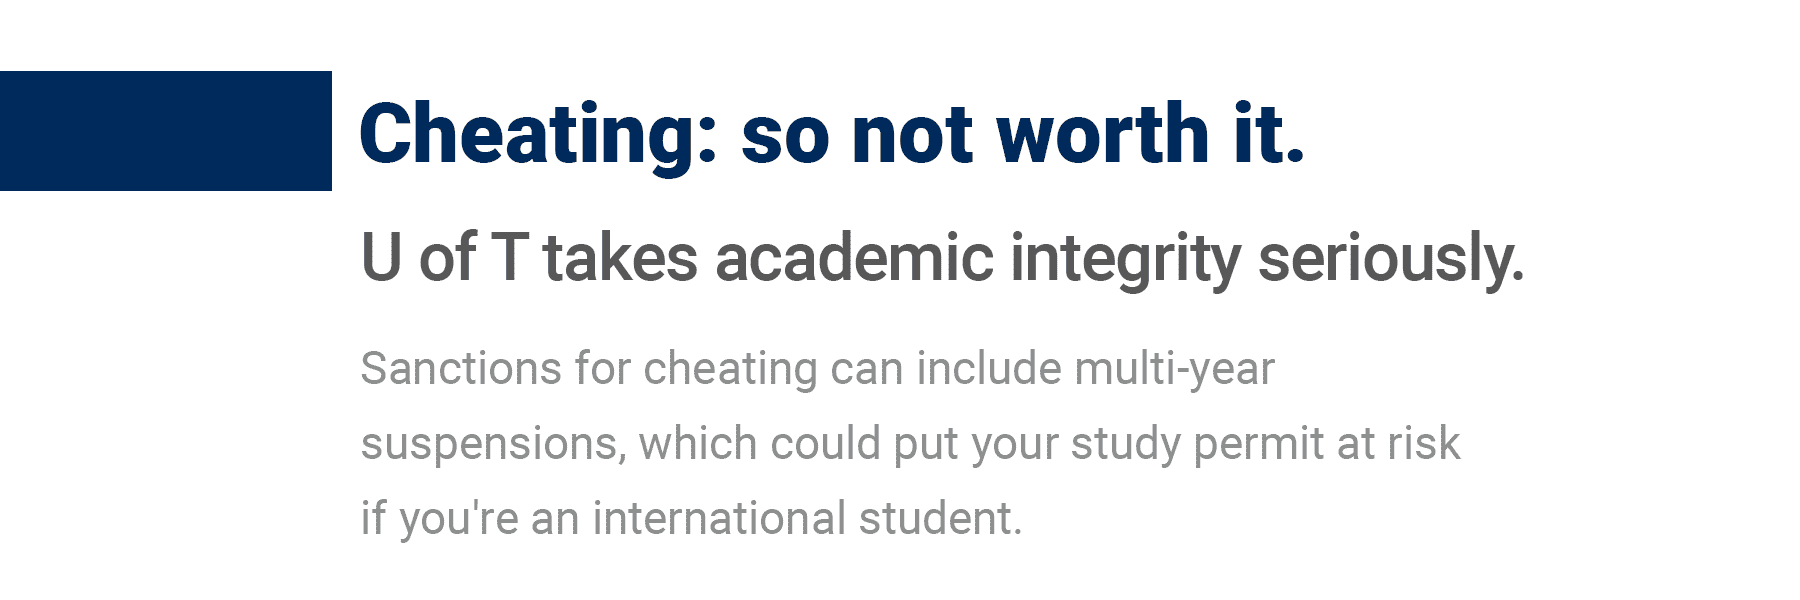 Cheating is so not worth it. U of T takes academic integrity seriously. Sanctions for cheating can include multi-year suspensions, which could put your study permit at riskif you're an international student.